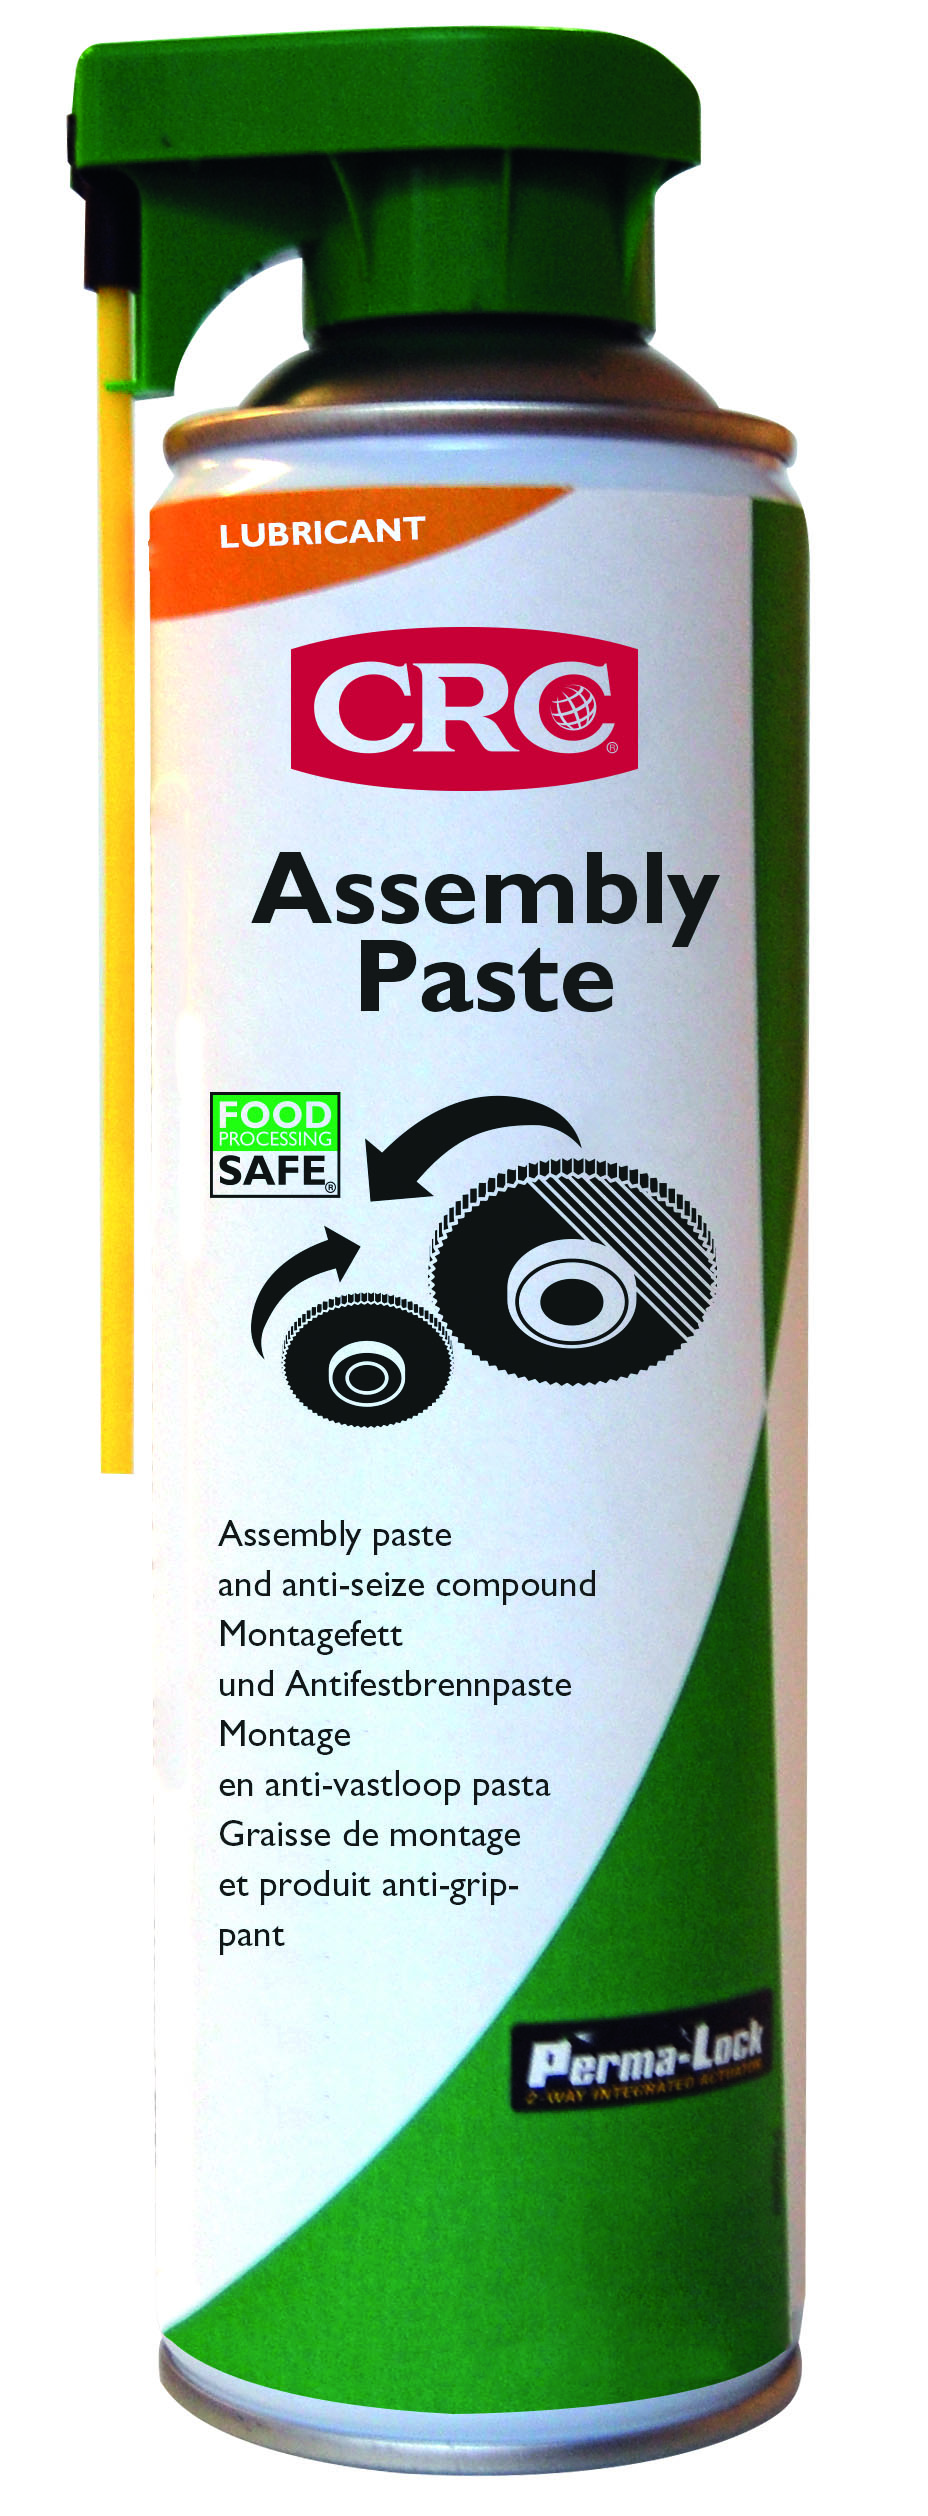 CRC Assembly Paste, Montagepaste NSF H1